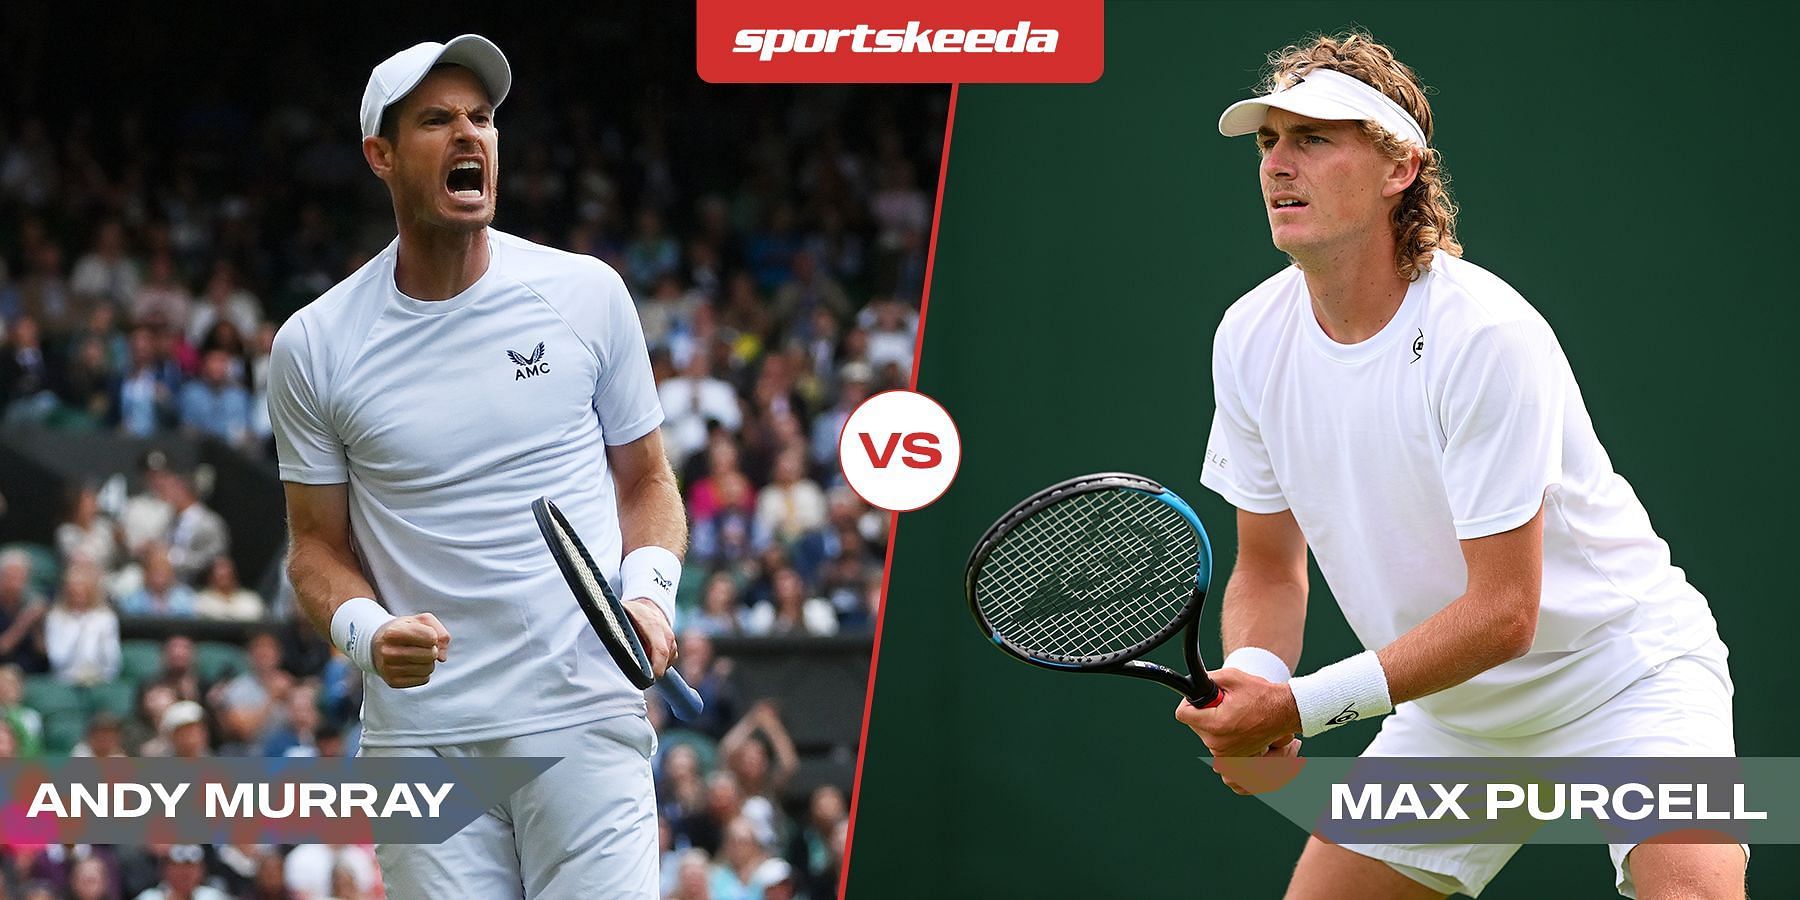 Andy Murray takes on Max Purcell in the last 16 of the Hall of Fame Open in Newport